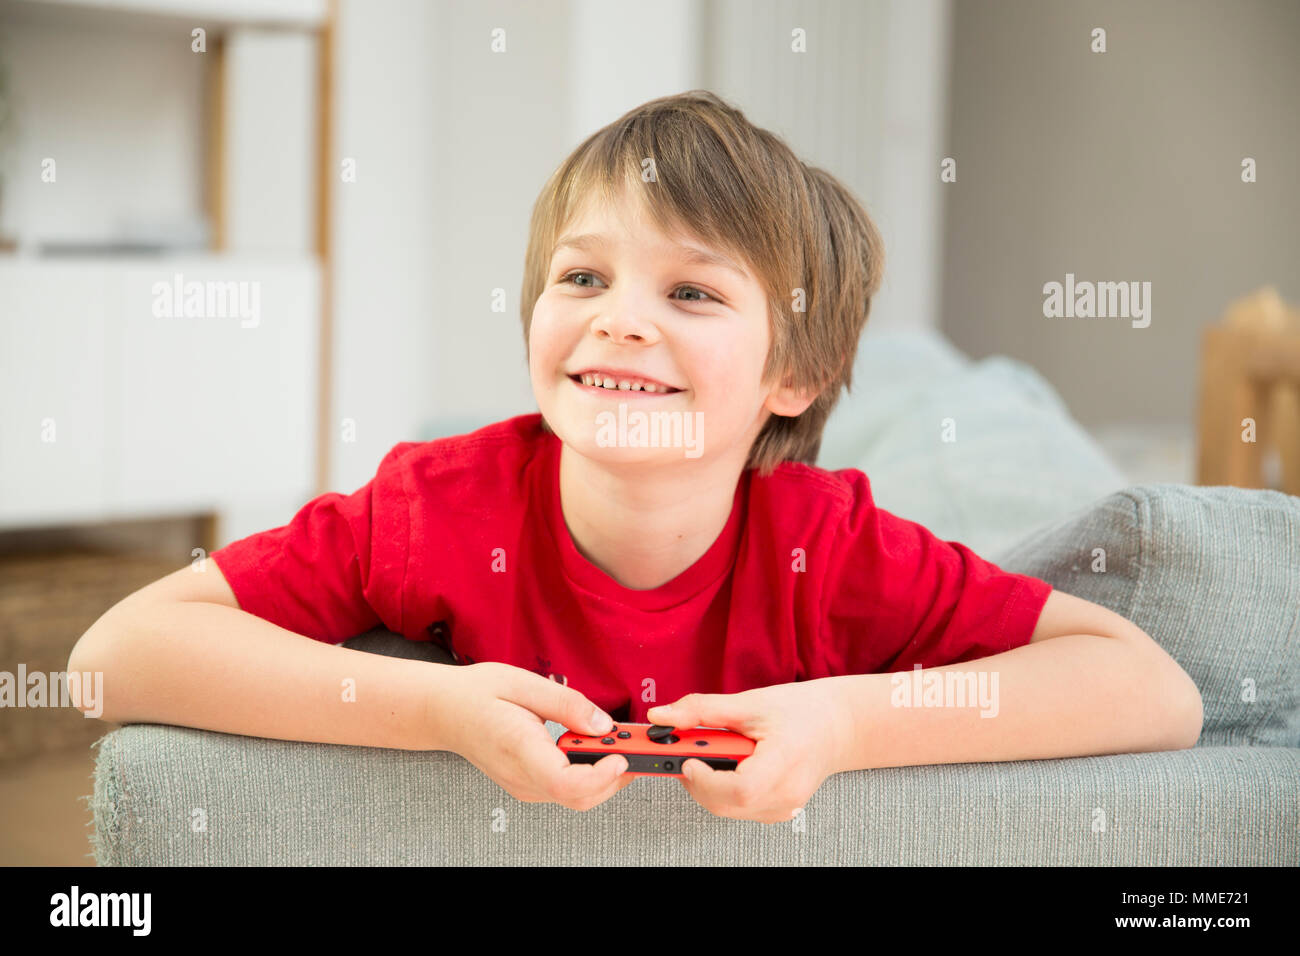 CHILD PLAYING VIDEO GAME Stock Photo